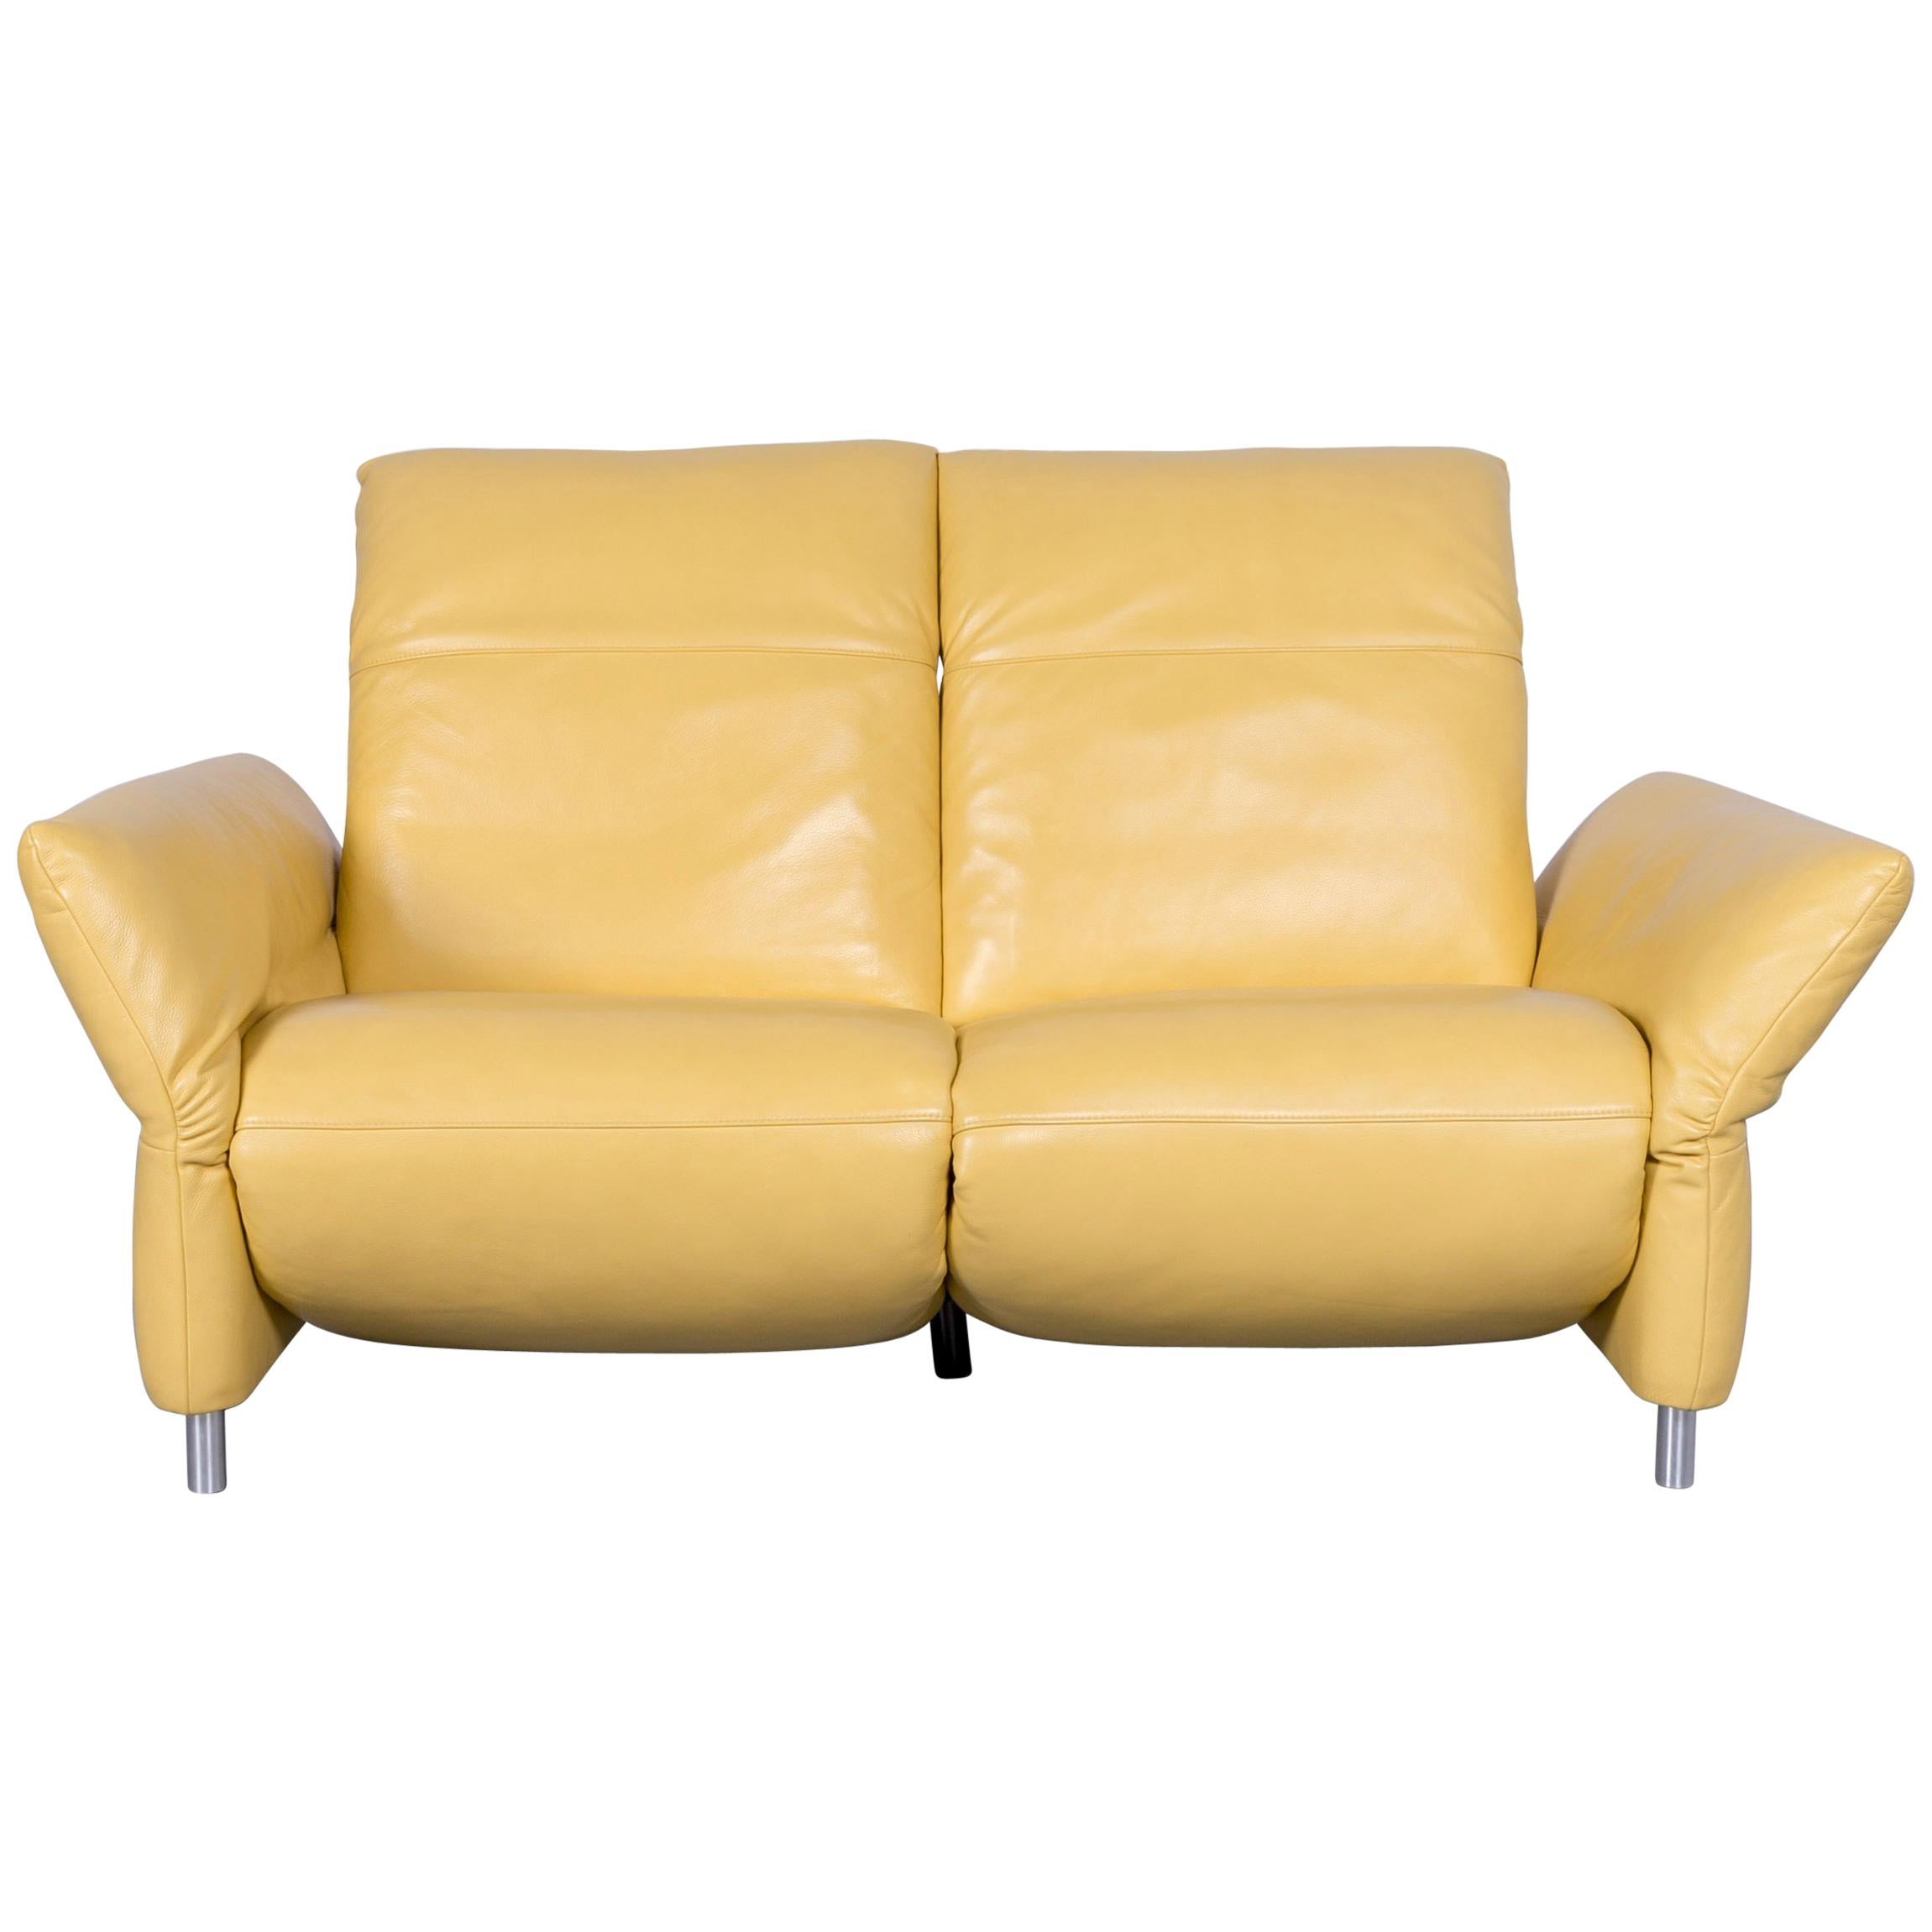 Koinor Elena Designer Two-Seat Sofa Yellow Leather Electric Function Couch